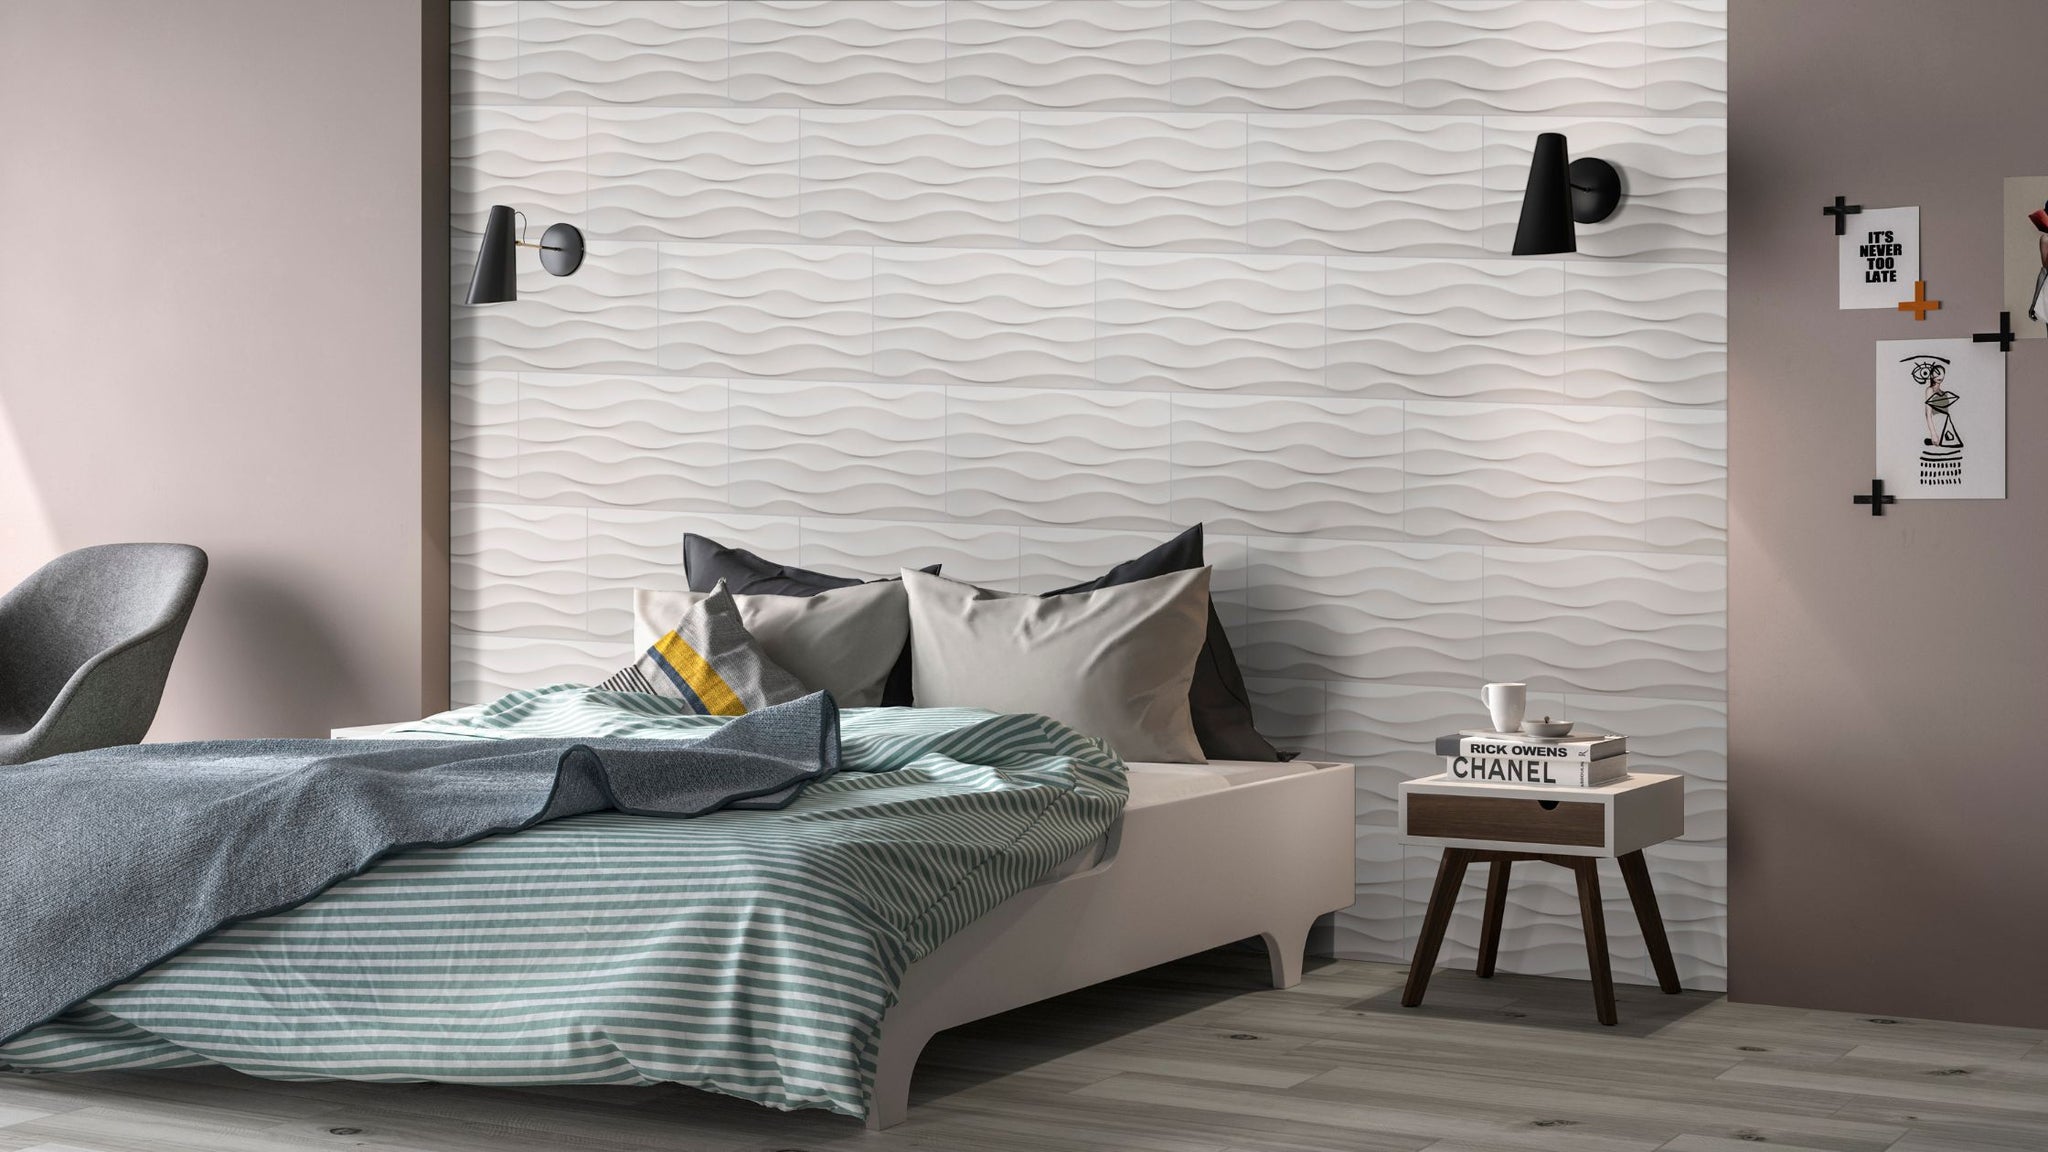 large format 3d tile used in a bedroom as an accent wall